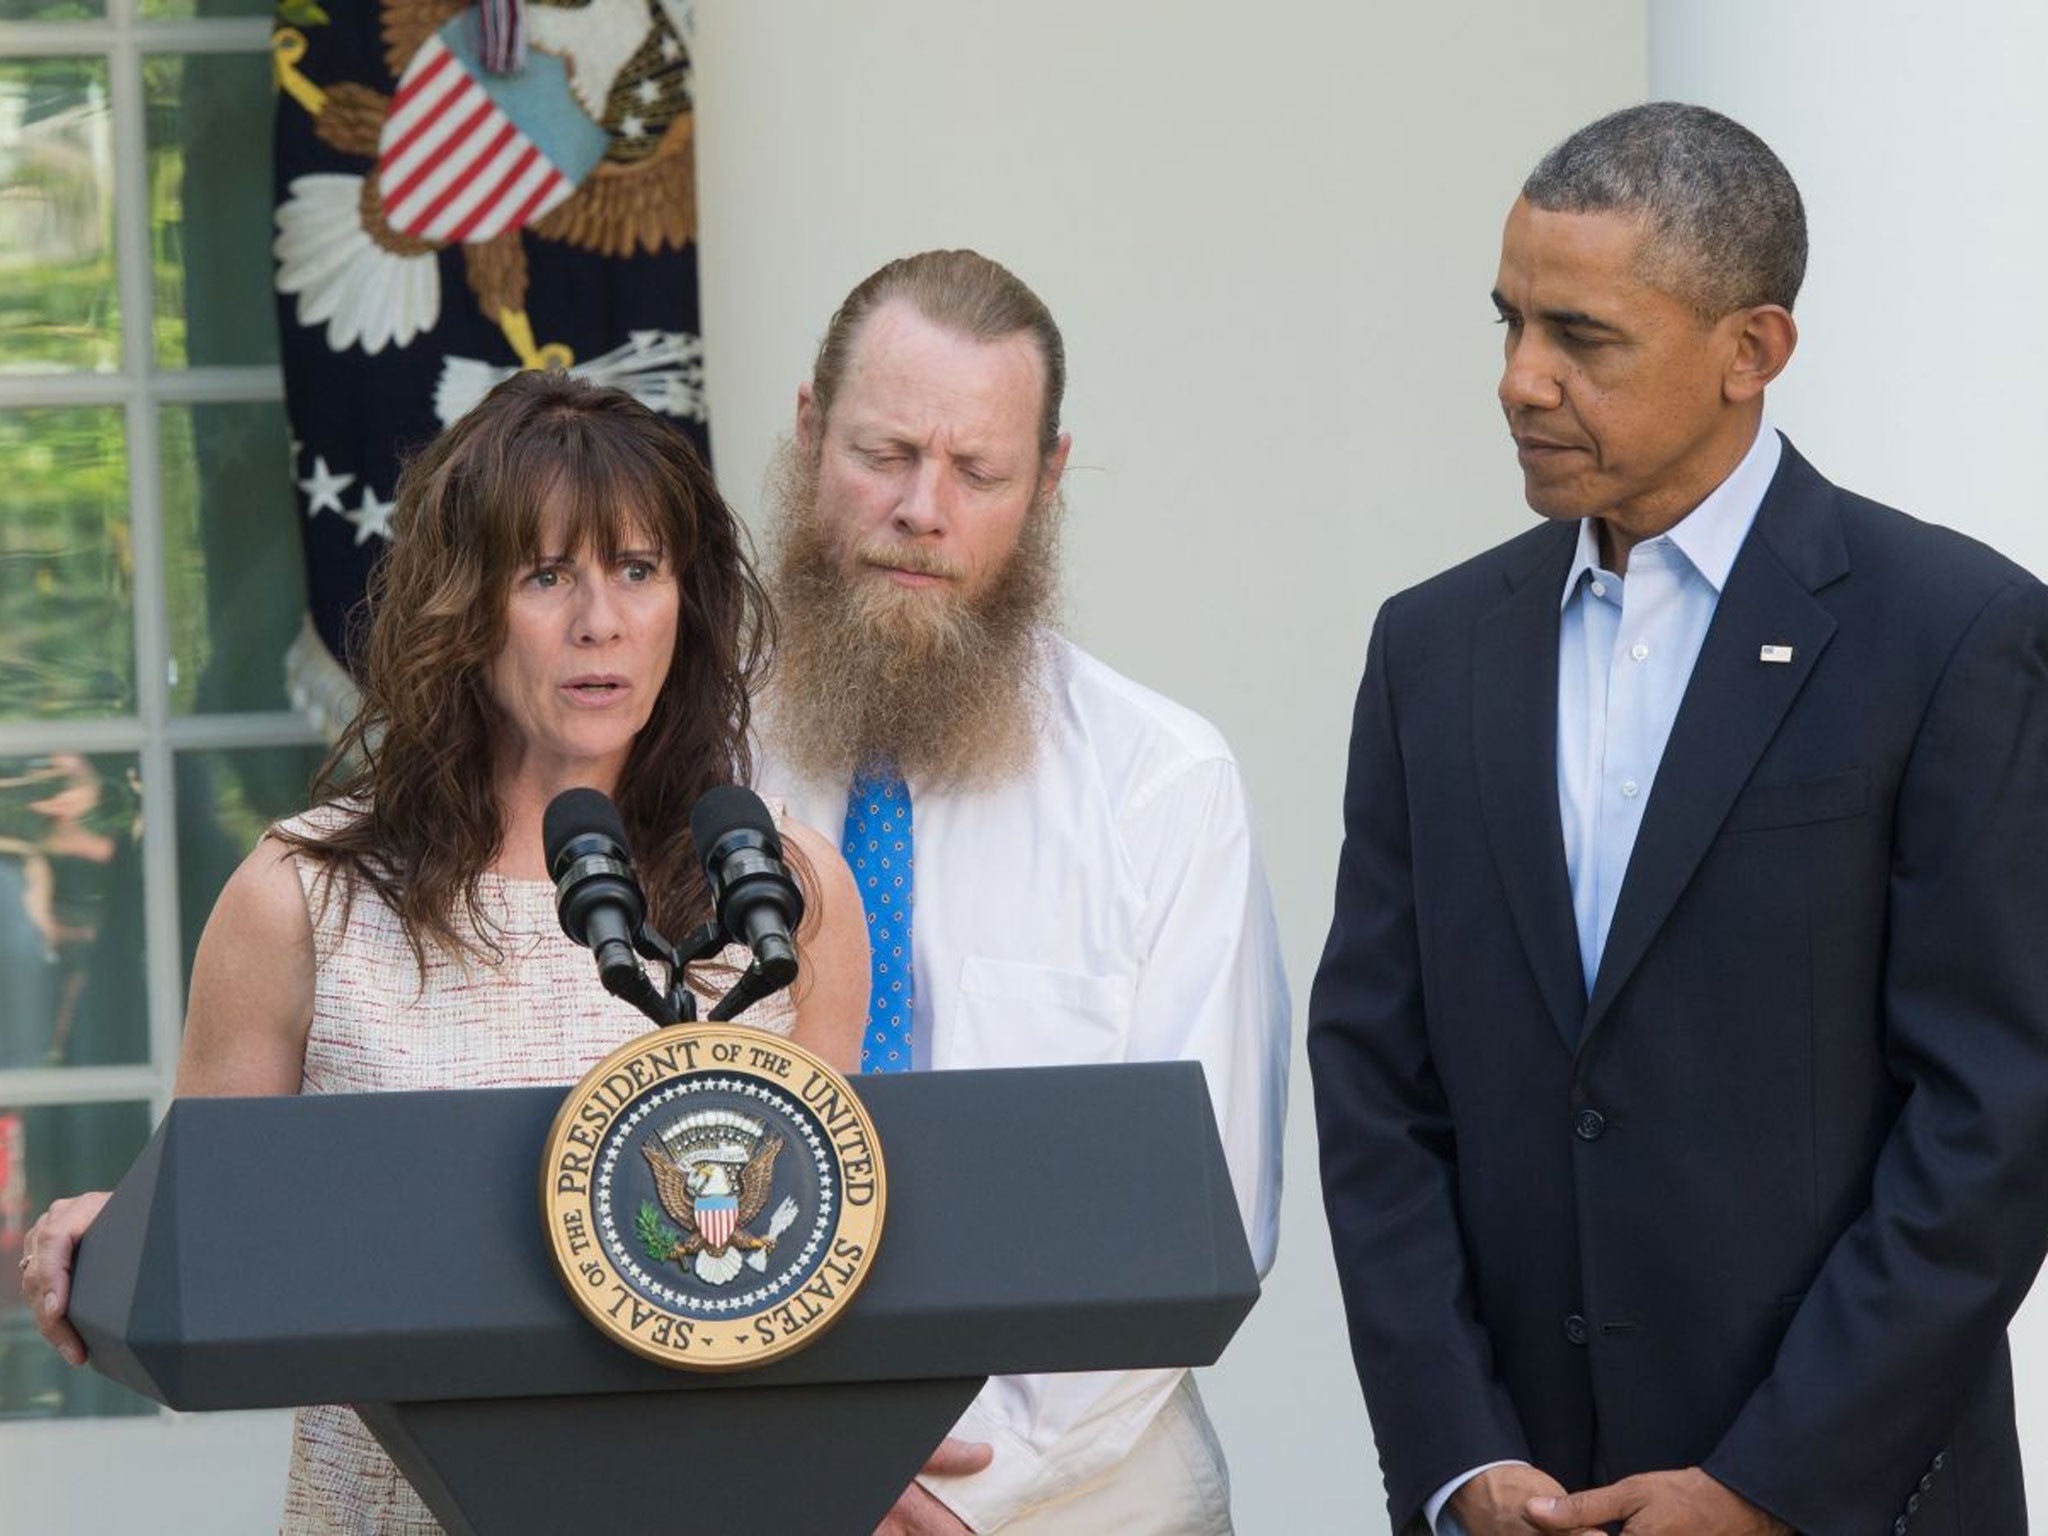 Jani Bergdahl makes a statement about the release of her son Sgt. Bowe Bergdahl as her husband Bob Bergdahl and President Barack Obama listen May 31, 2014 in the Rose Garden at the White House in Washington, DC